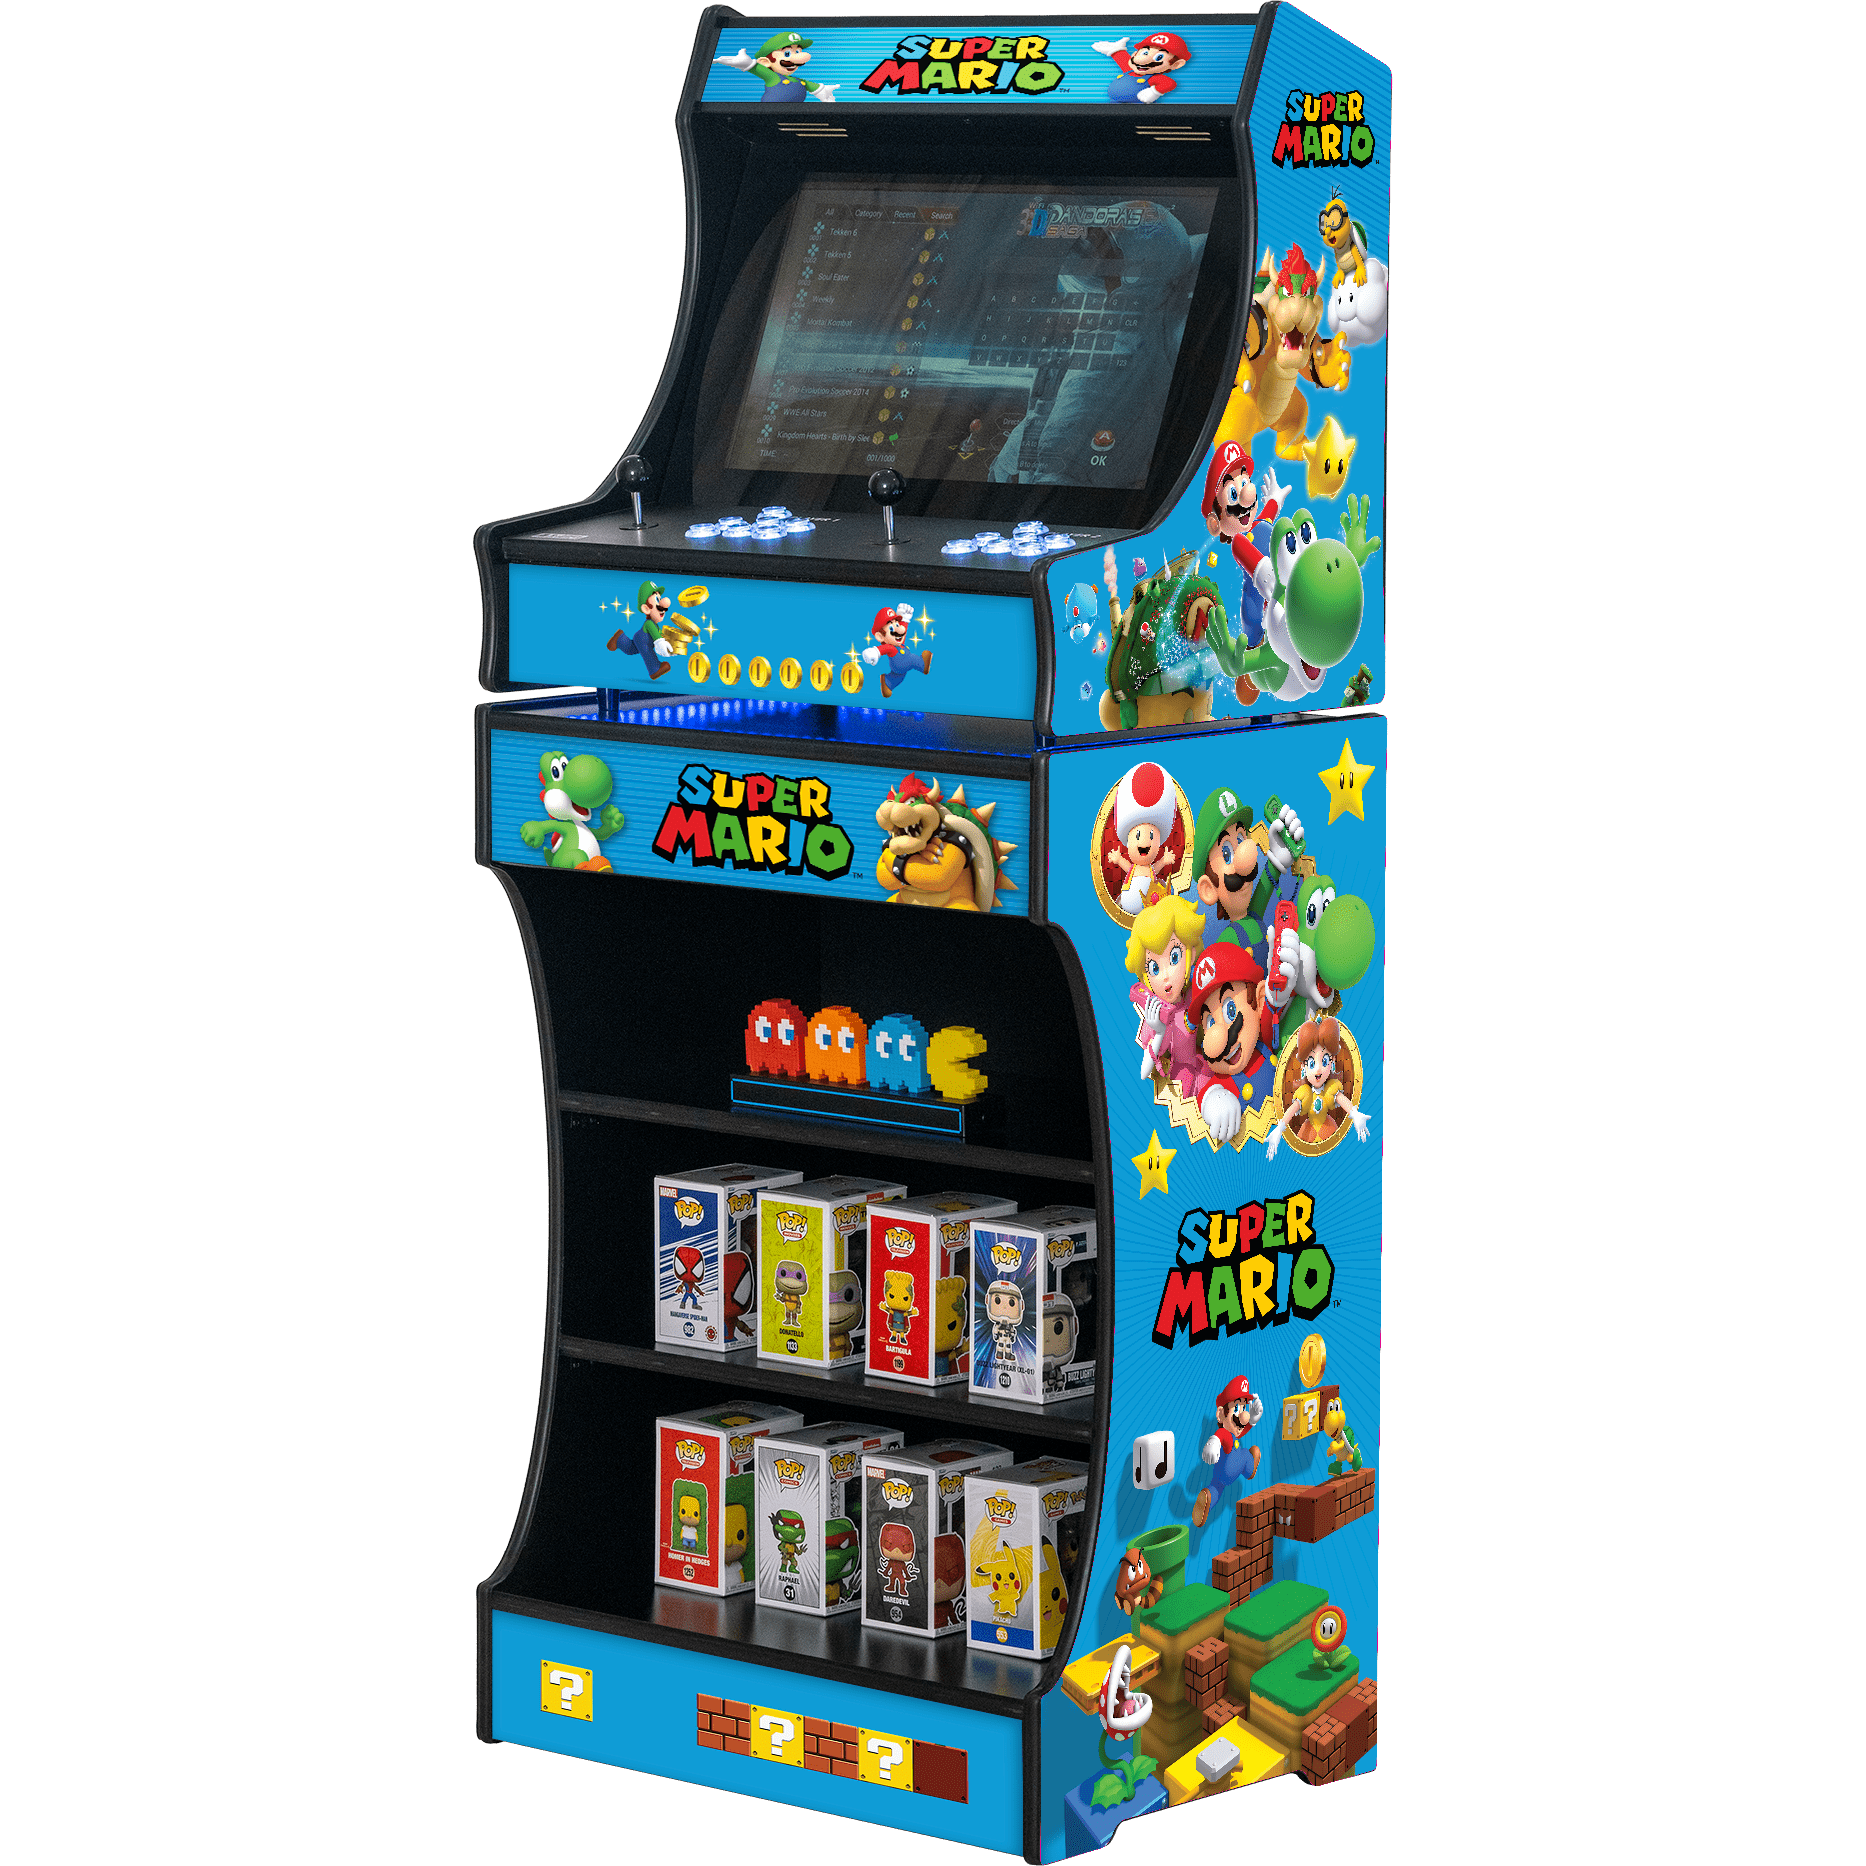 Upright 24 Inch Arcade Machine - 10,000 Games Included